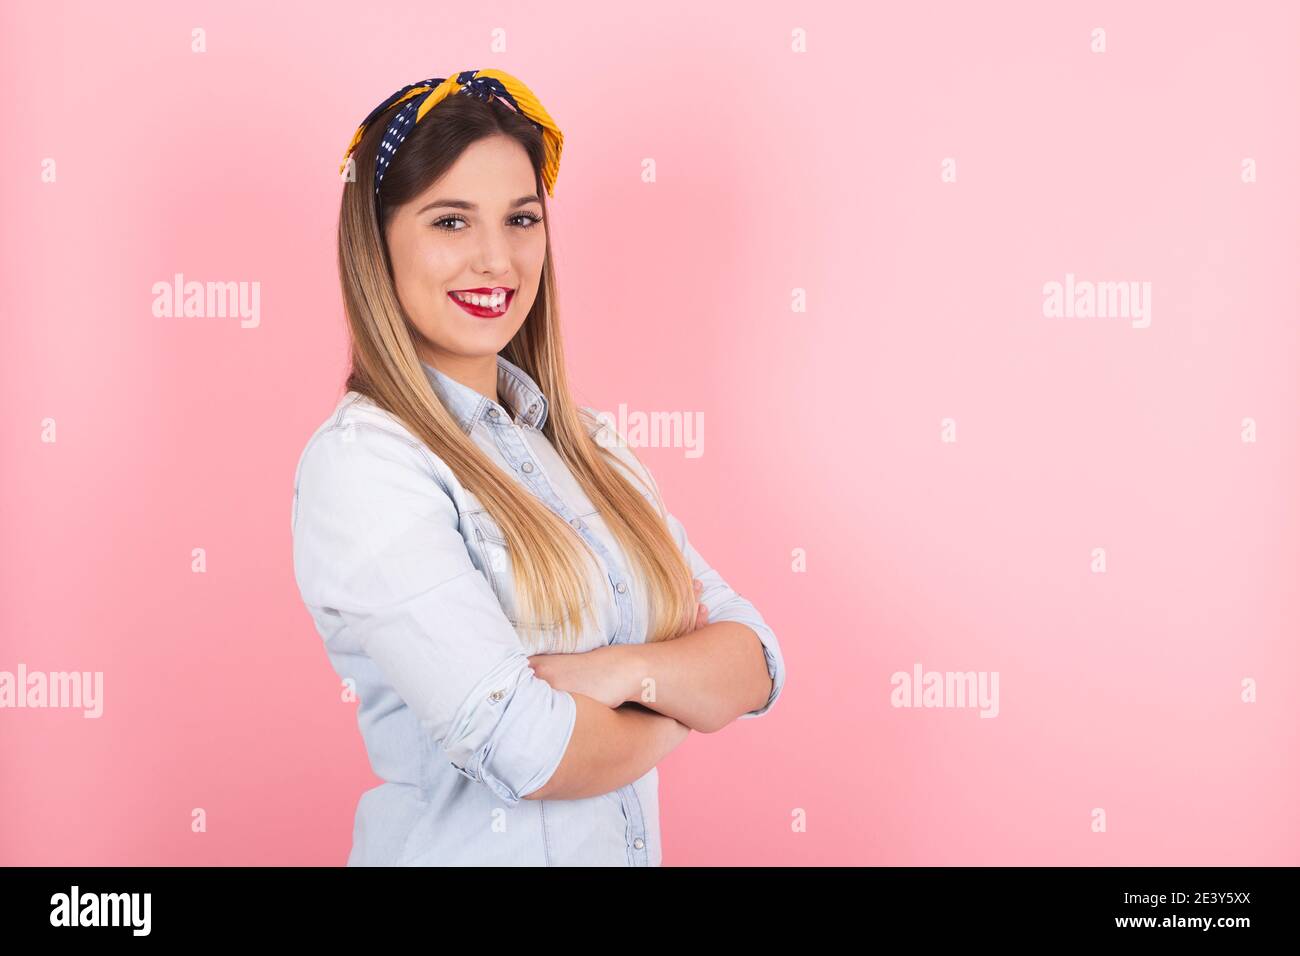 Young pin up woman shows off her smiling face Stock Photo